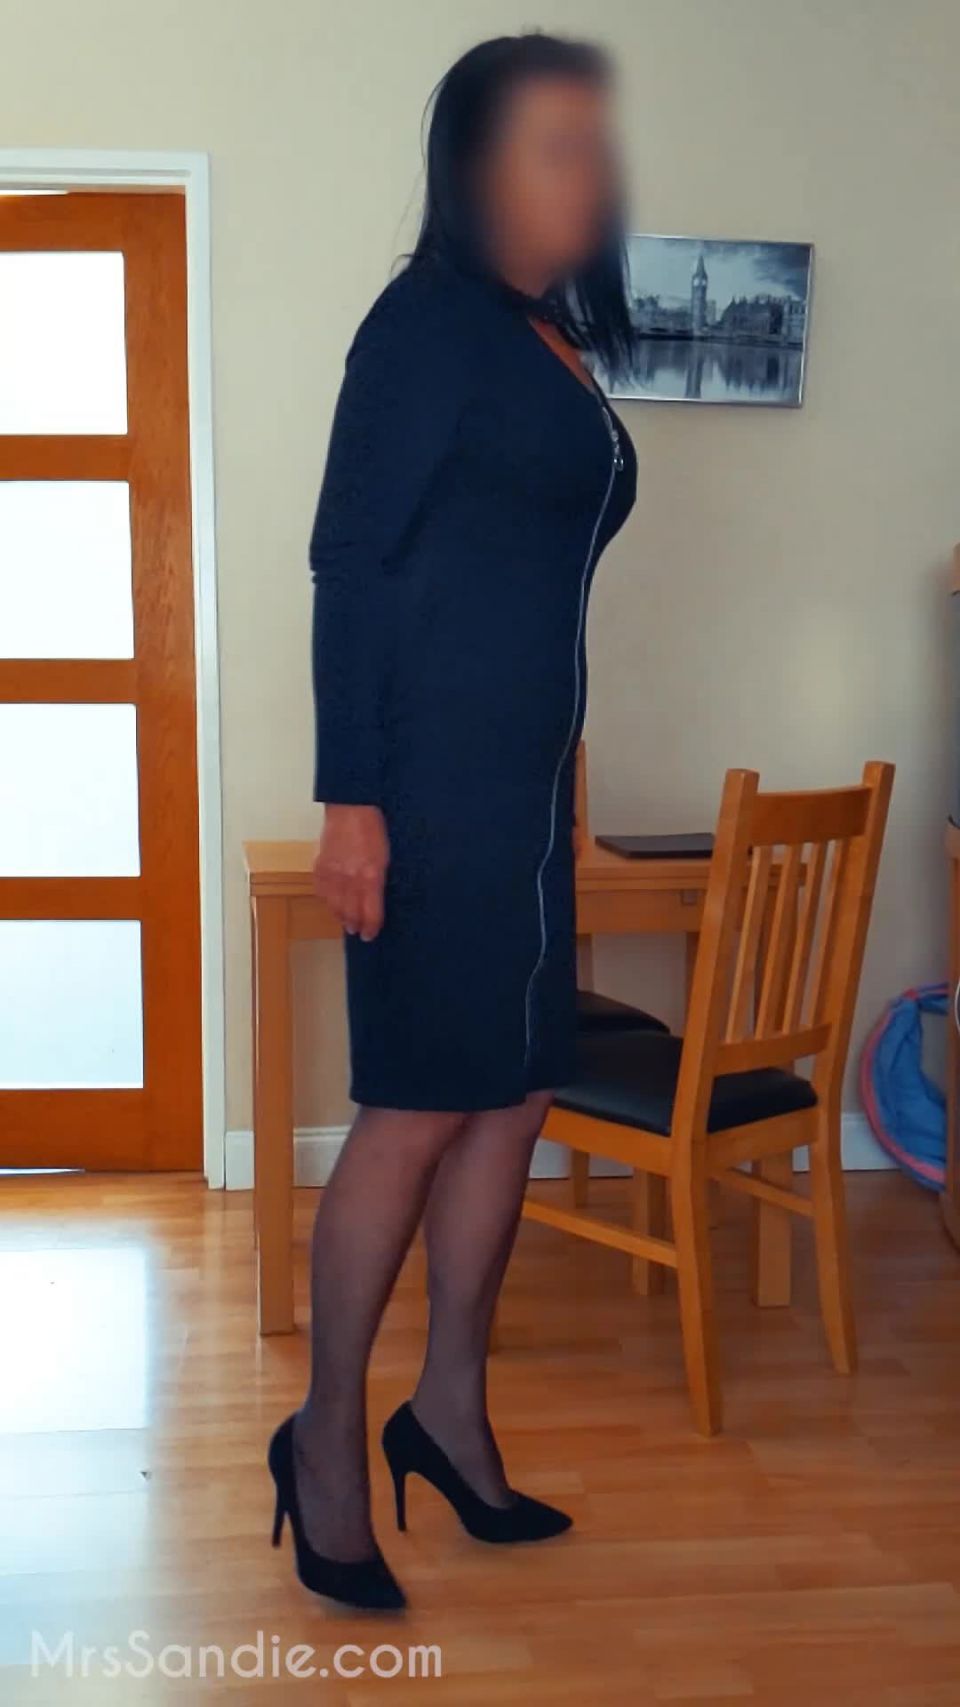 Mrs Sandie Mrssandie - zipper dress hopefully youre going to splaf your load to my bald cunt when you see the d 04-08-2021